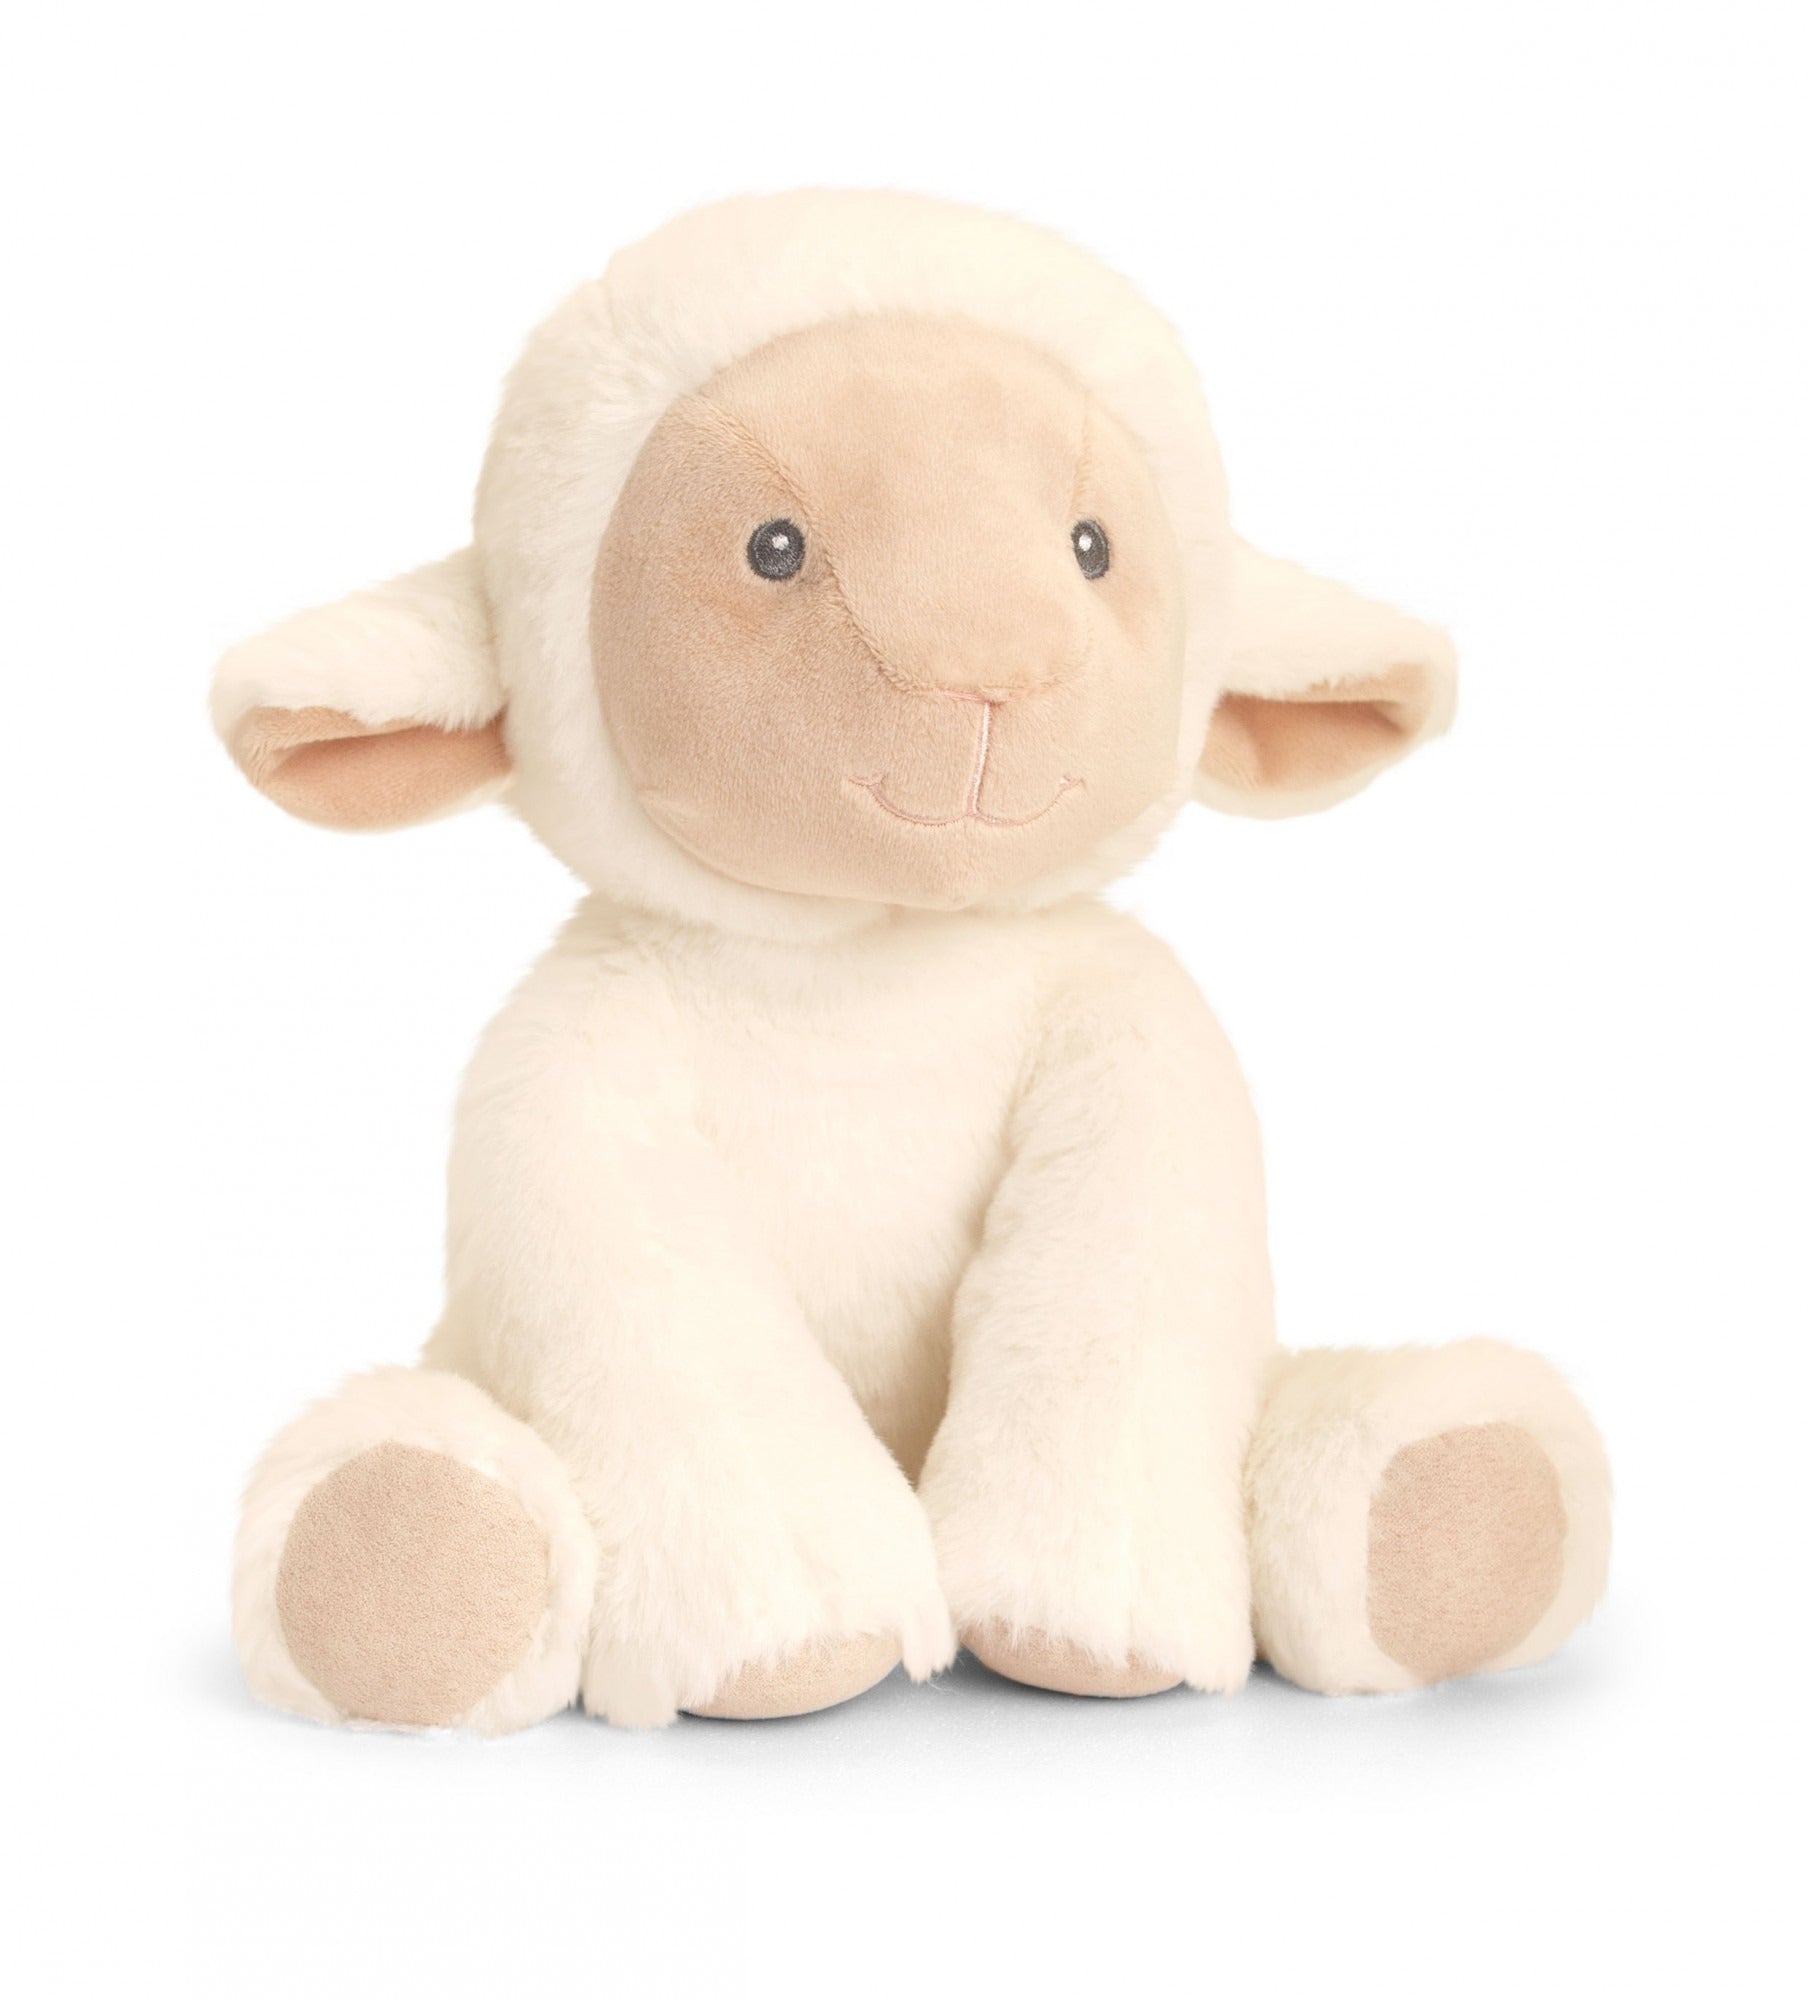 View Keeleco Lullaby Lamb 25cm information